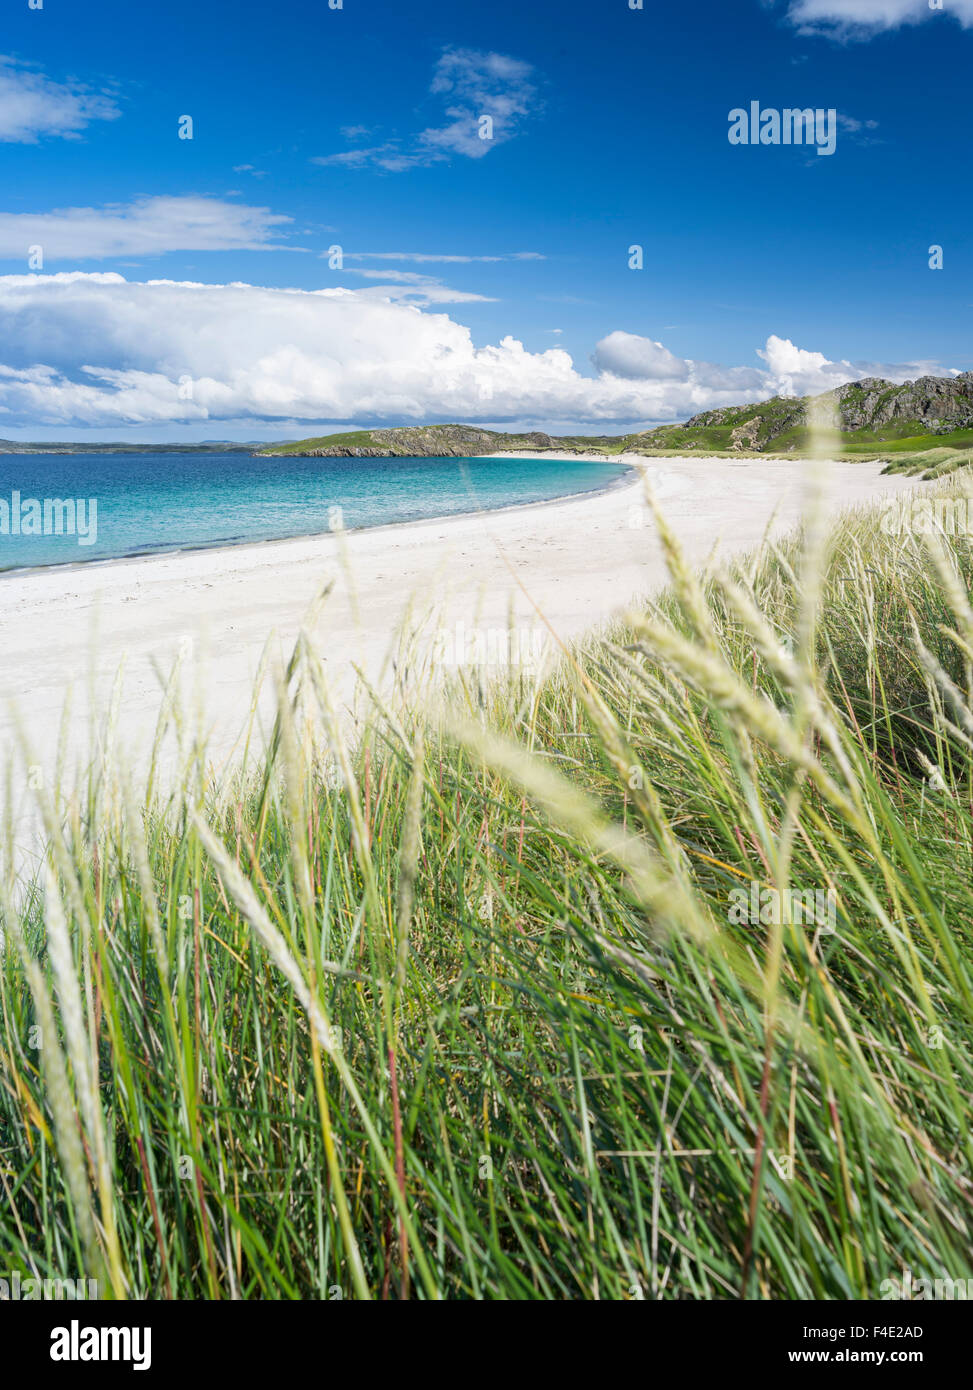 Landscape in the northern part of the Isle of Lewis, which, together with the connected Isle of Harris, make up the largest island in na Berie or Reef Beach, one of the finest beaches in the Hebrides. (Large format sizes available) Stock Photo